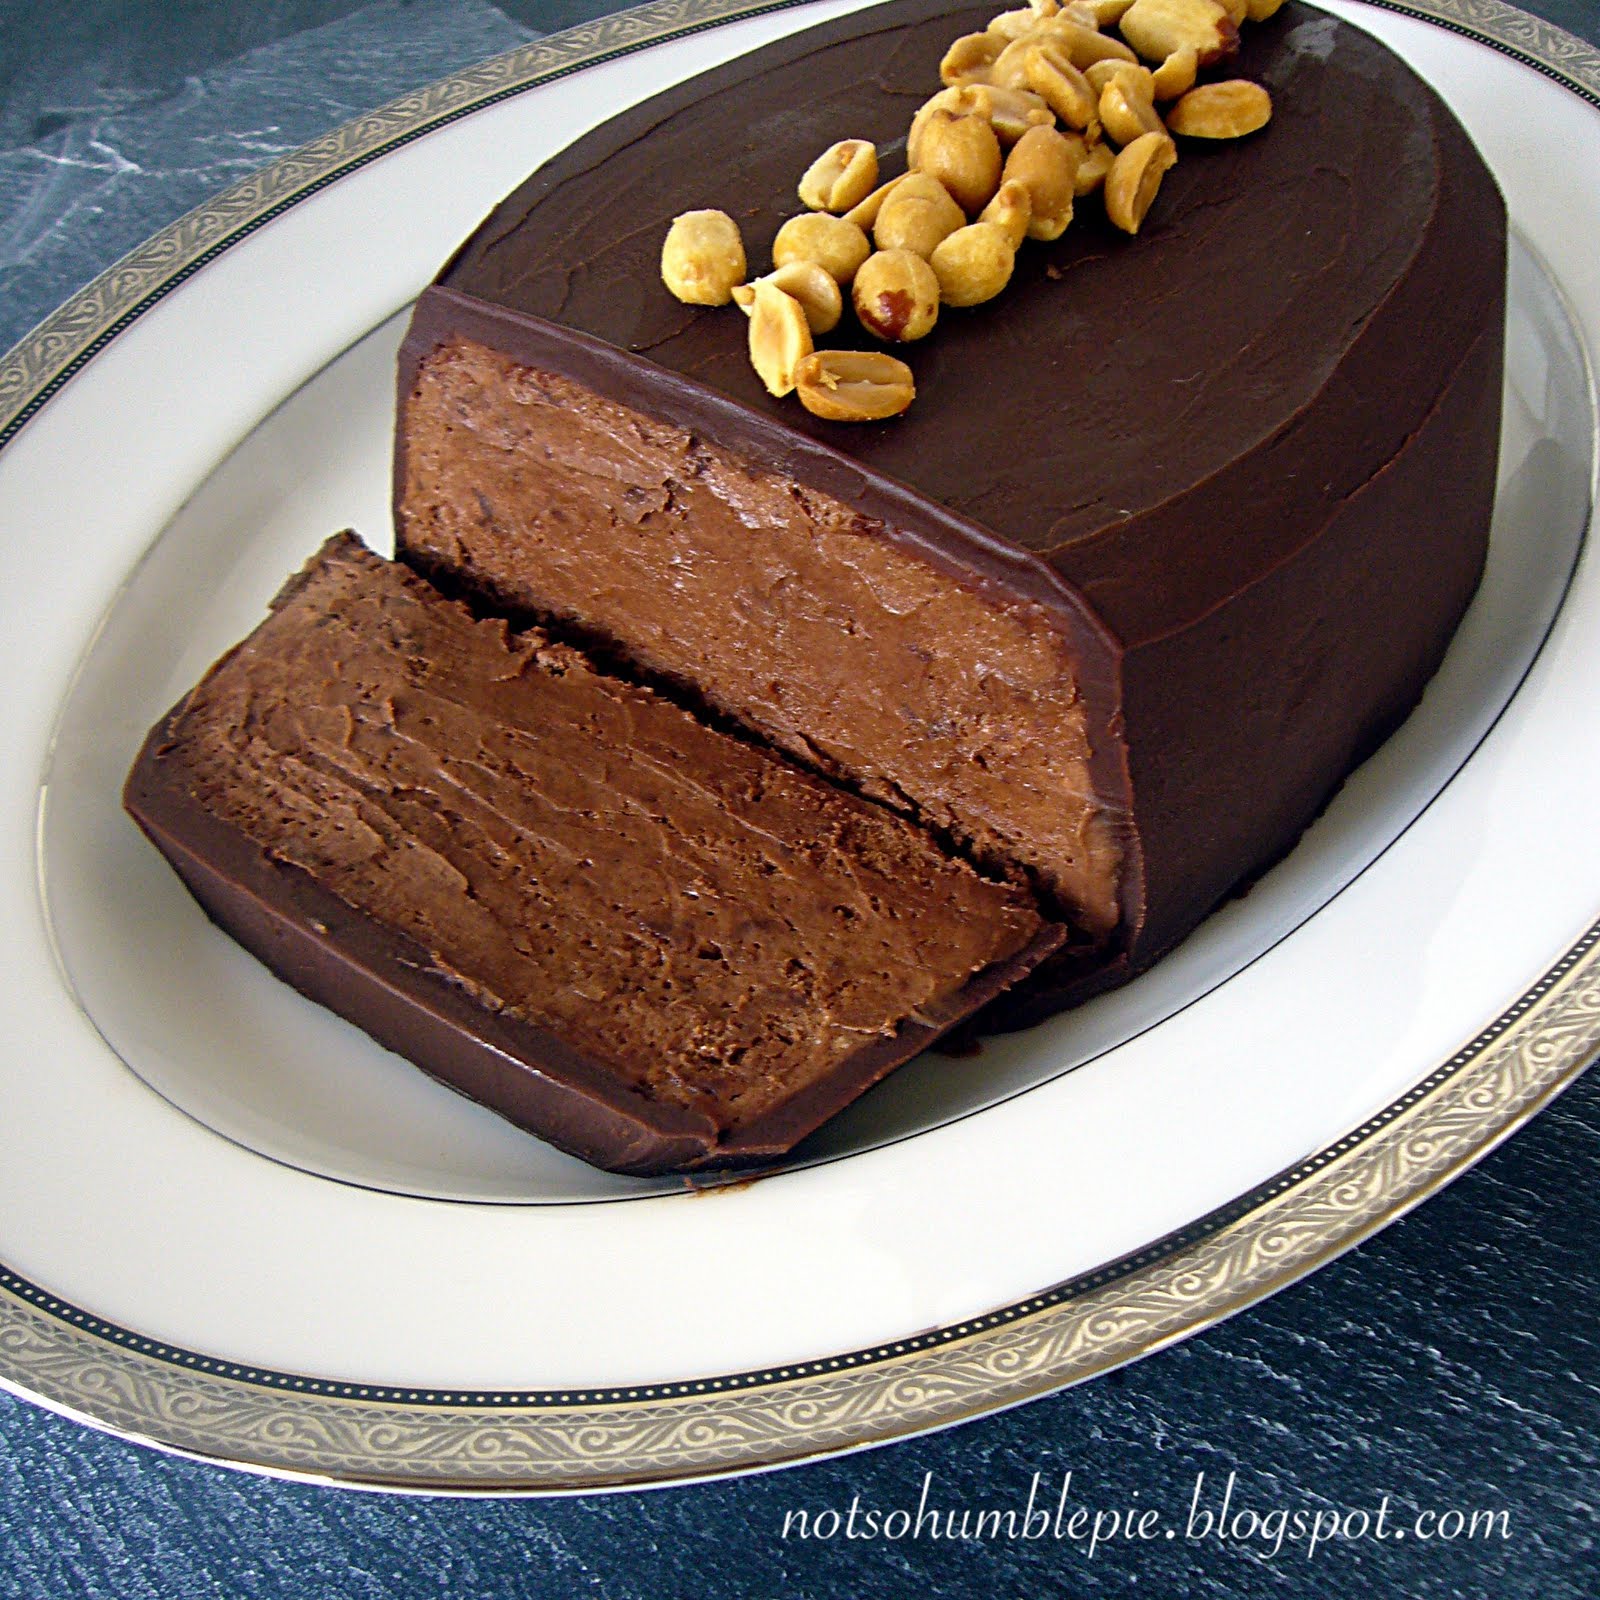 Not So Humble Pie: Terrine of Chocolate Peanut Butter Mousse